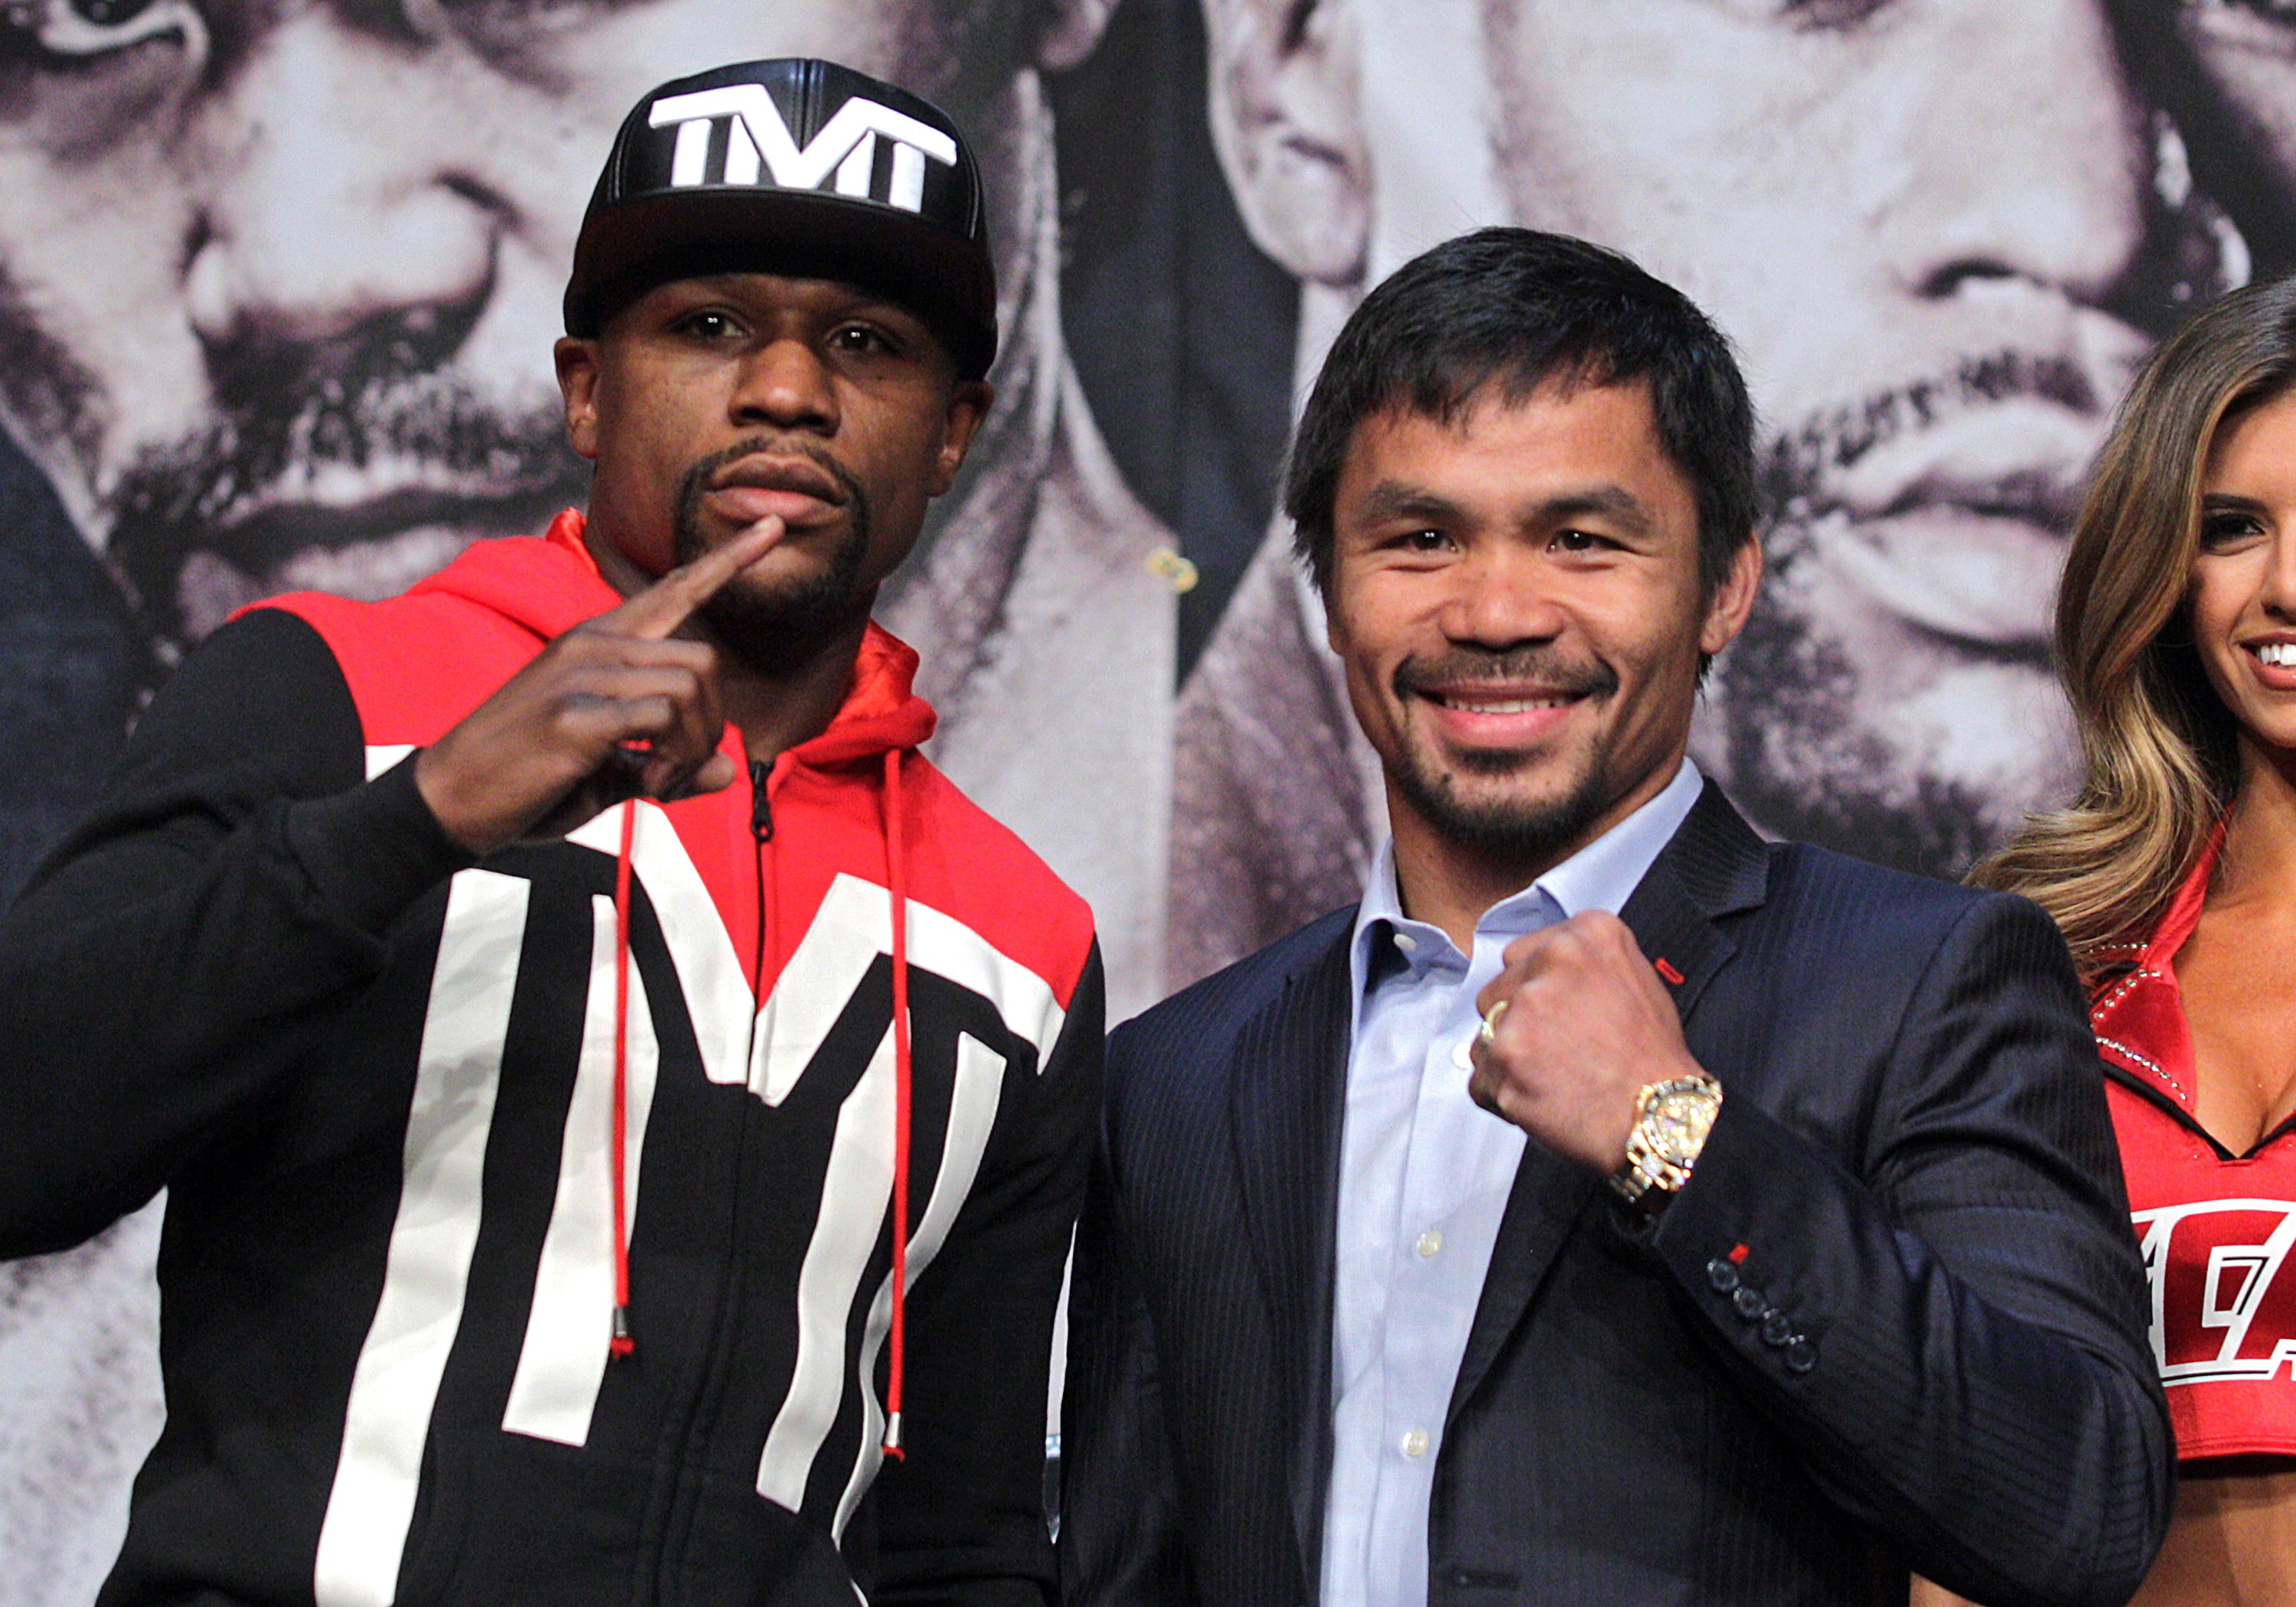 WBC/WBA welterweight champion Floyd Mayweather Jr. (L) and WBO welterweight champion Manny Pacquiao pose during a news conference at the KA Theatre at MGM Grand Hotel &amp; Casino on April 29, 2015 in Las Vegas, Nevada. (John Gurzinski&mdash;AFP/Getty Images)